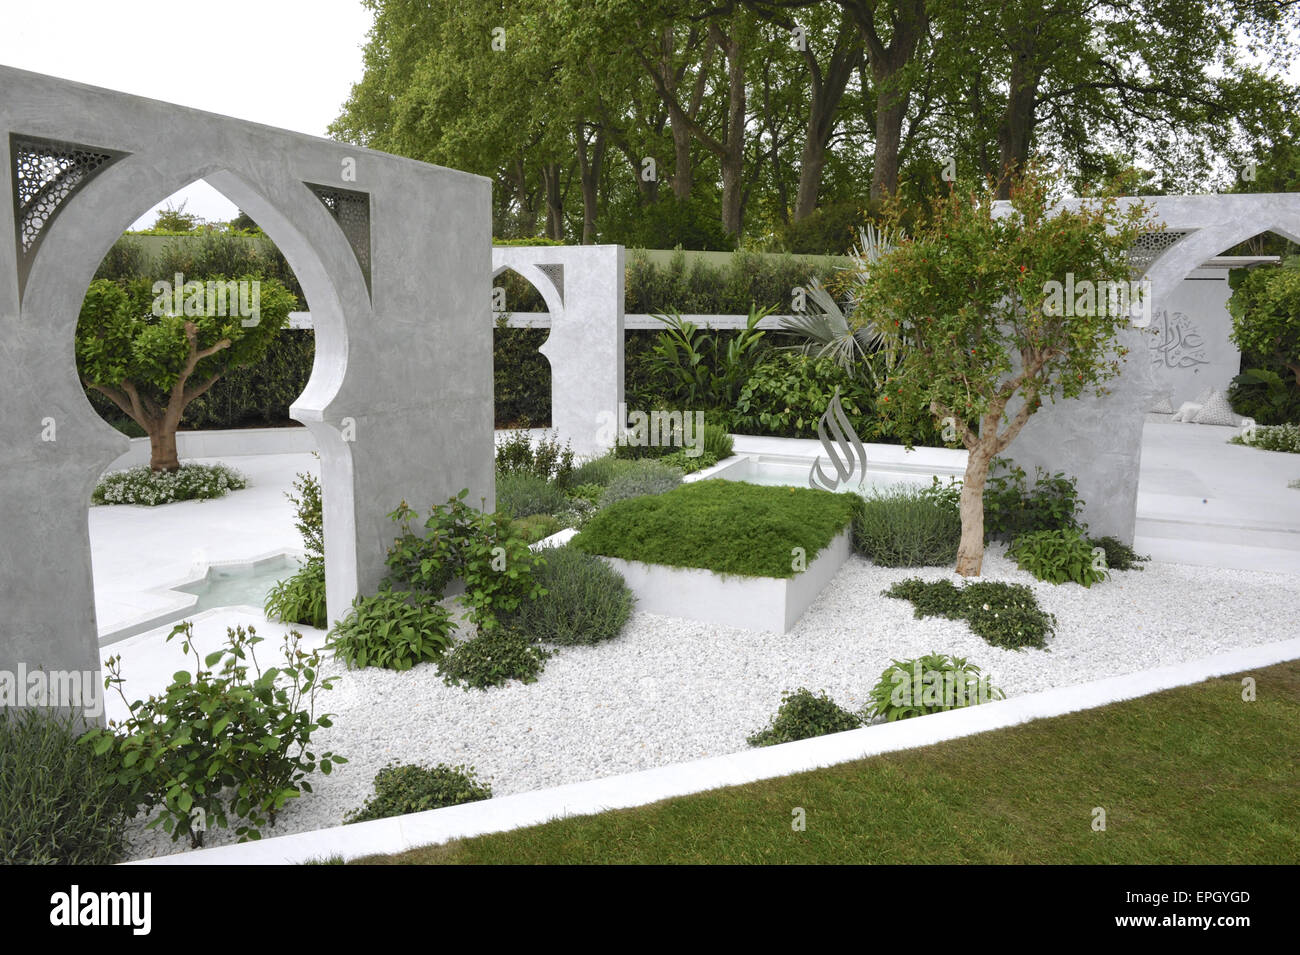 london, uk. 18th may, 2015. the beauty of islam garden at the